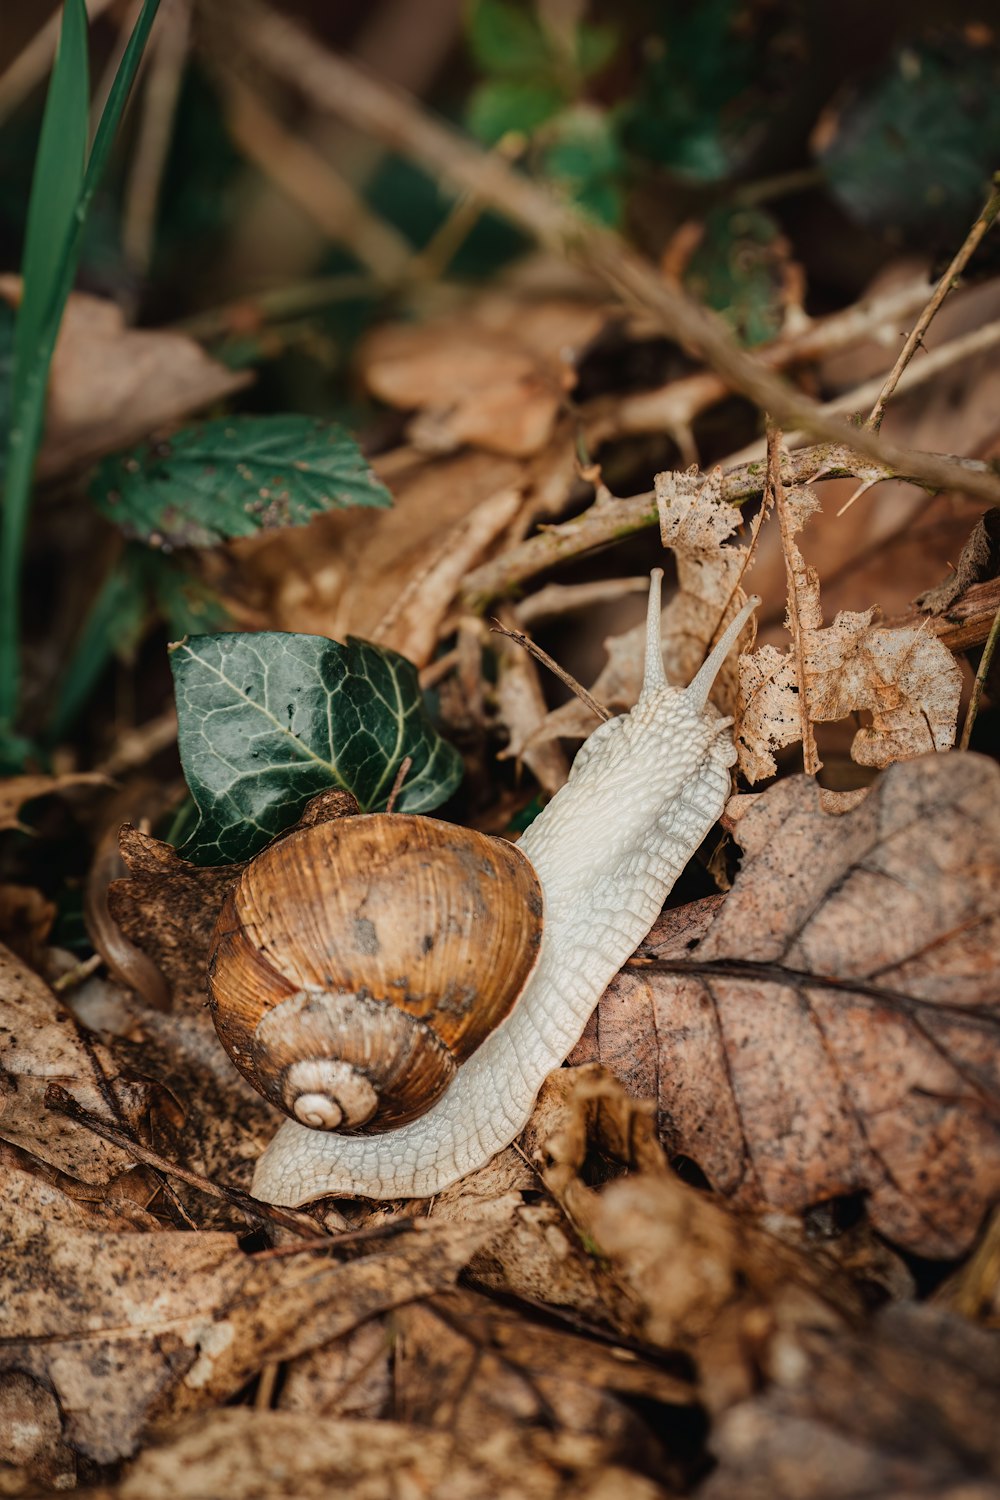 a snail crawling on the ground among leaves